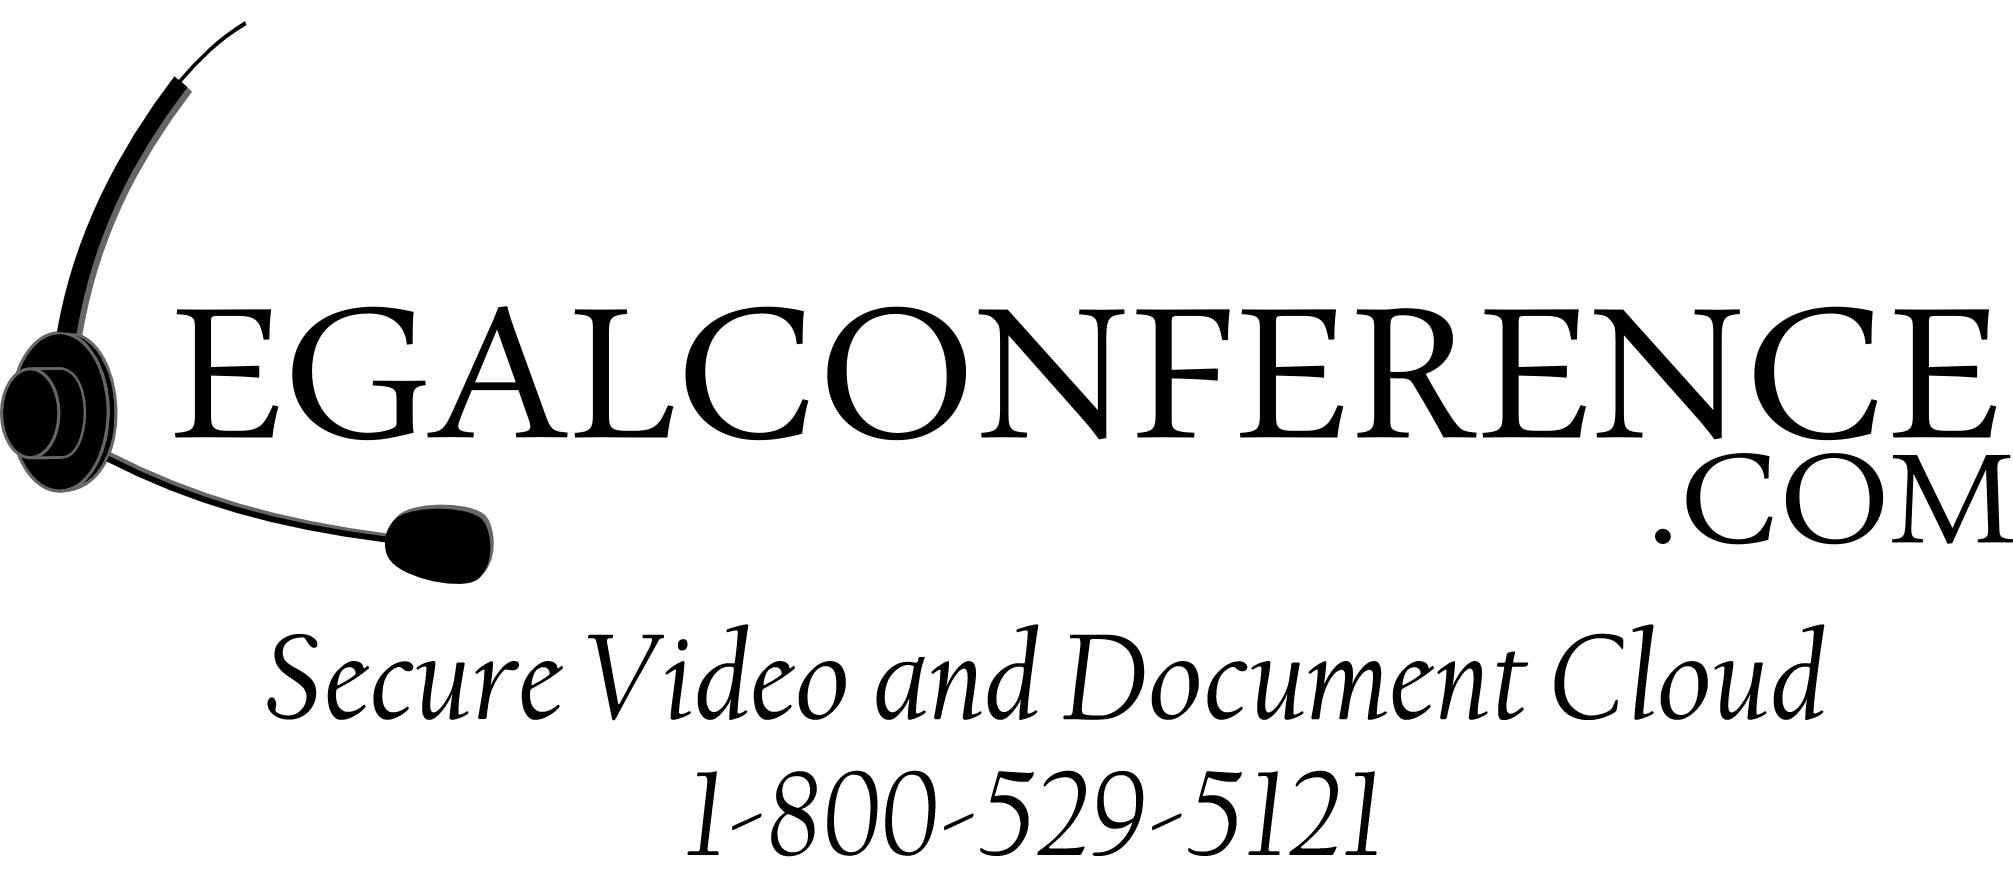 LegalConference.com